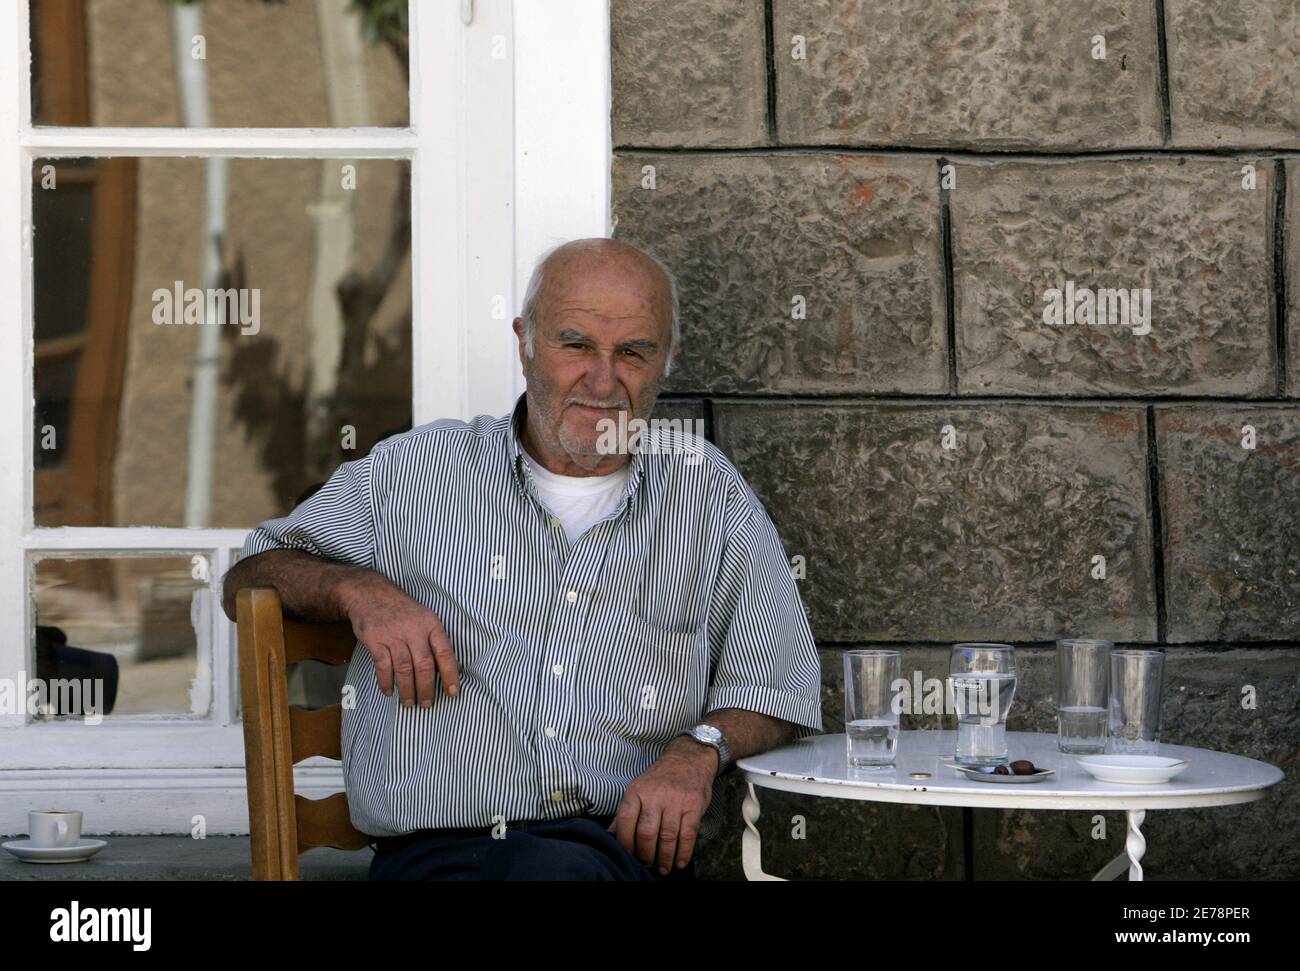 Retired sailor Christos Labropoulos, 71, sits at a coffee shop in the town of Kirra in central Greece, some 200km (124 miles) west of Athens, September 11, 2007. Days before a closely fought Greek election, a deep political divide has gripped the town of Kirra, which correctly predicted the result of the last parliamentary vote. Picture taken September 11, 2007. REUTERS/Yiorgos Karahalis  (GREECE) Stock Photo